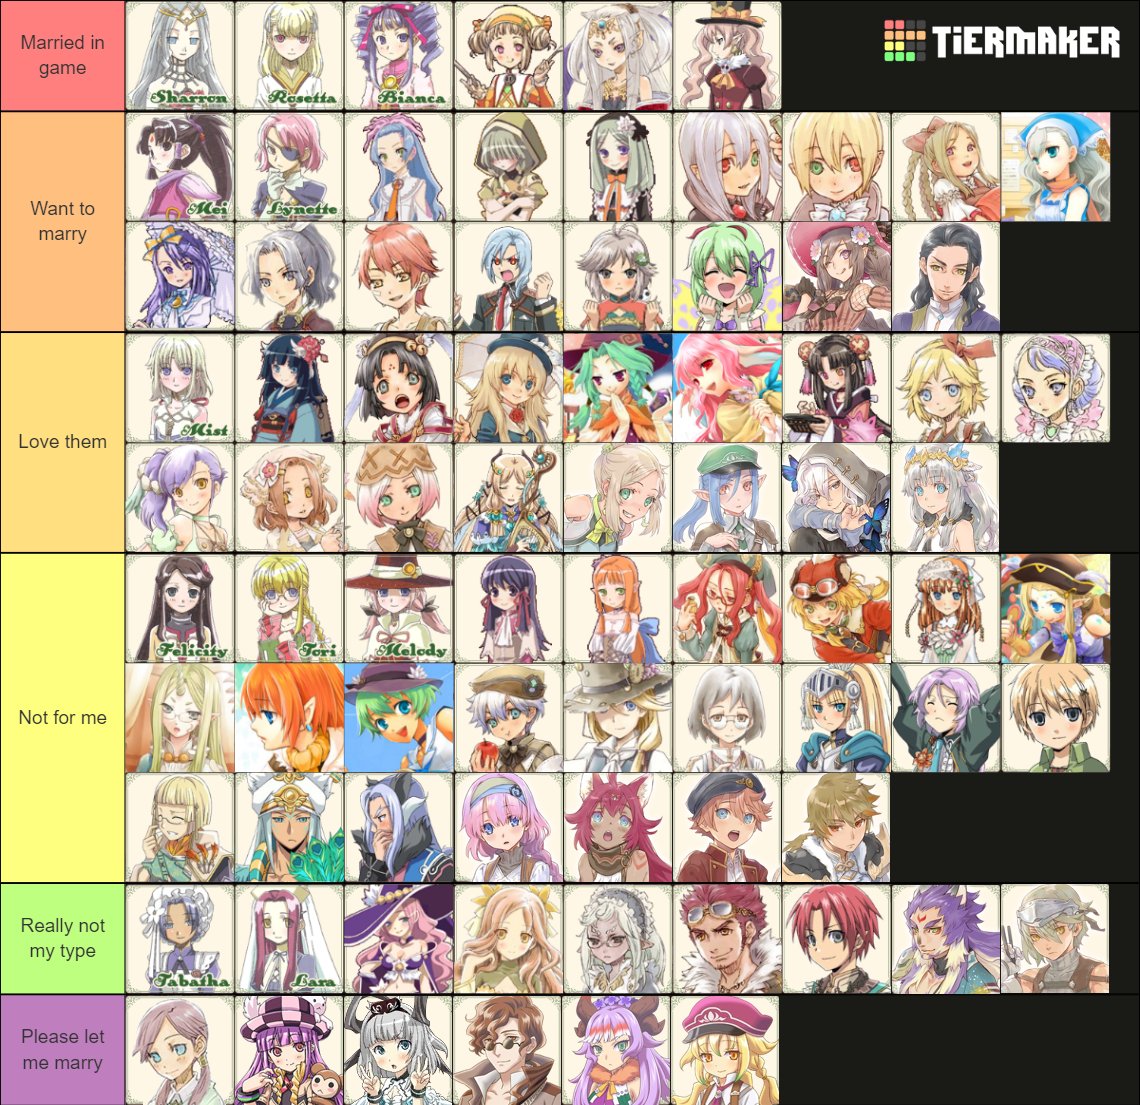 With my hype for RF3S, here's a tier list for the marriage candidates in all Rune Factory games!

I've yet to ever marry in RF2 or RF5. And Rosetta and Bianca I've married in Frontier specifically, not the original game.